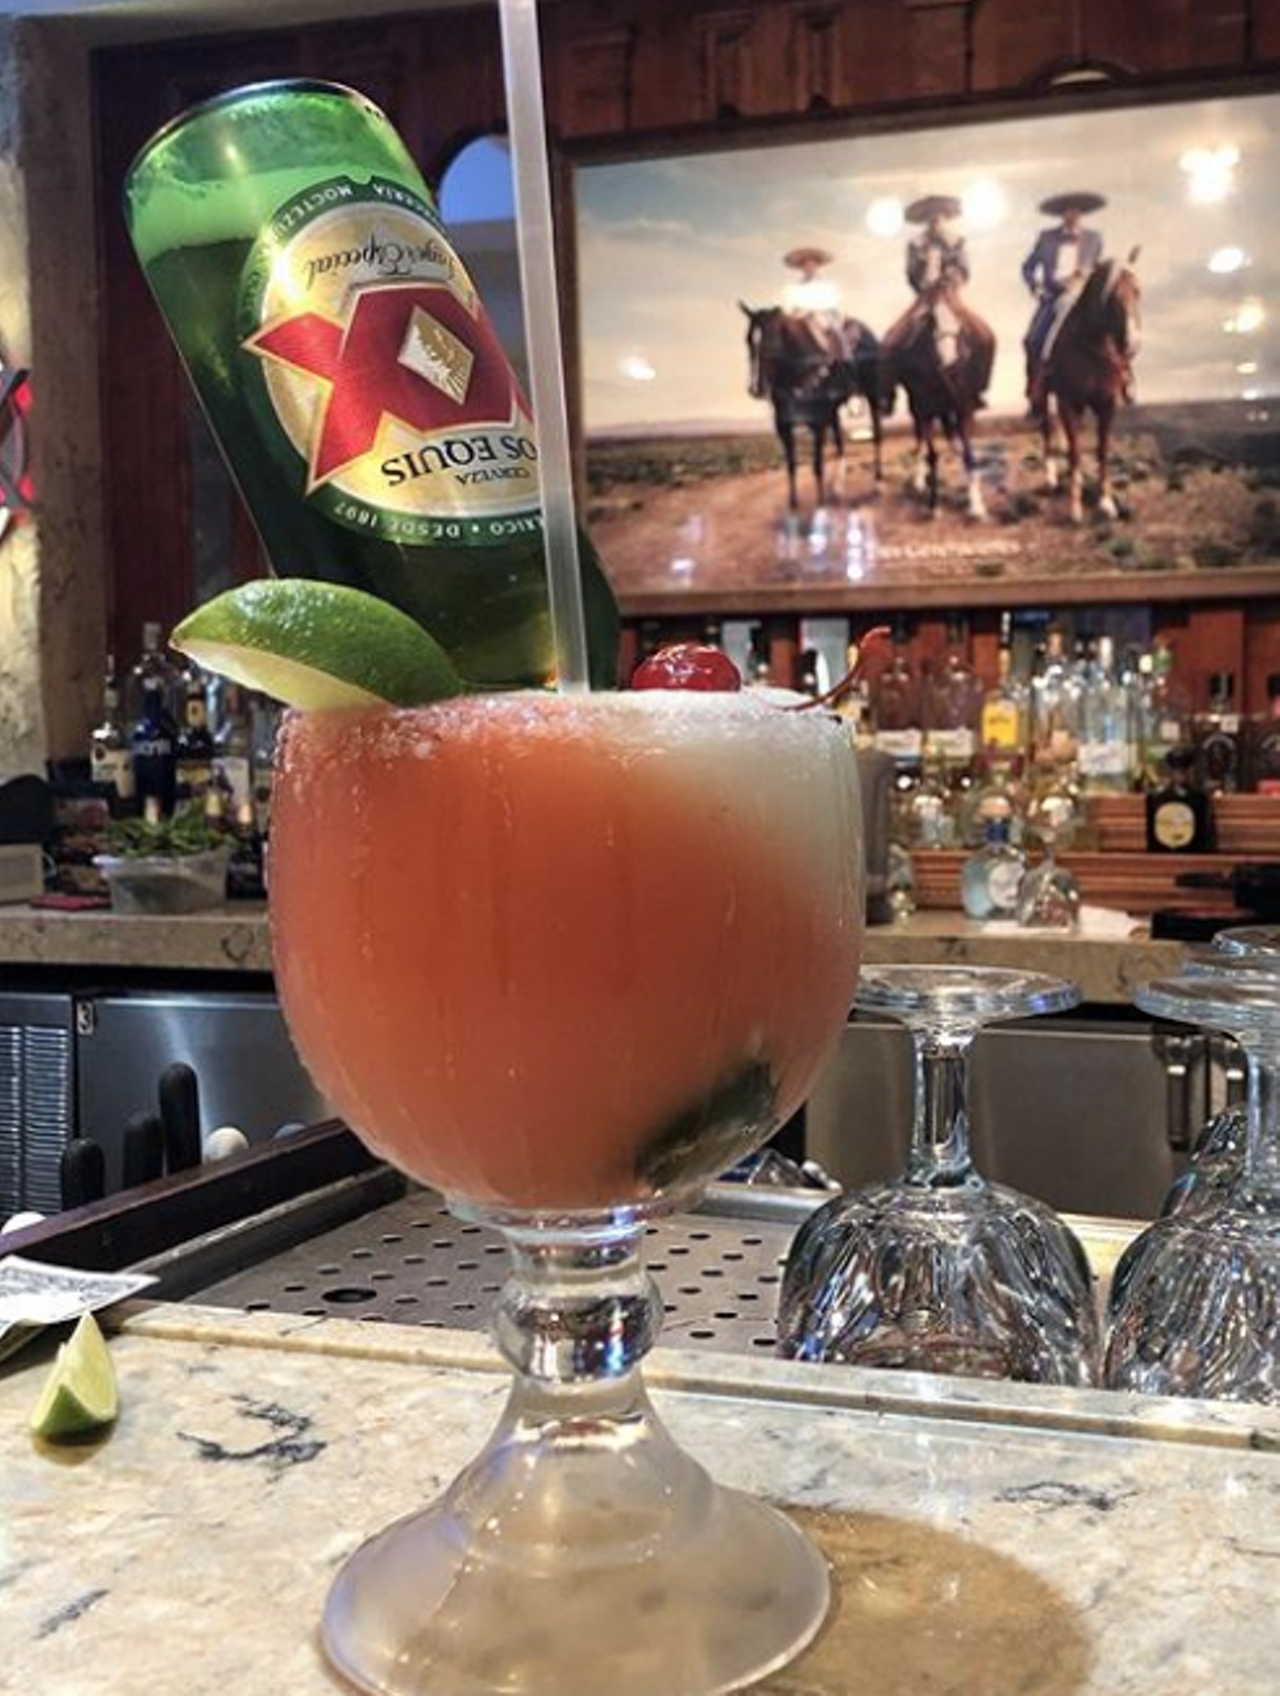 Margaritas
San Antonio can party, just look at how we do during Fiesta. That means we’re more than knowledgeable about what makes a great margarita. Just look at this – we know what we’re doing.
Photo via Instagram / latinxyogi